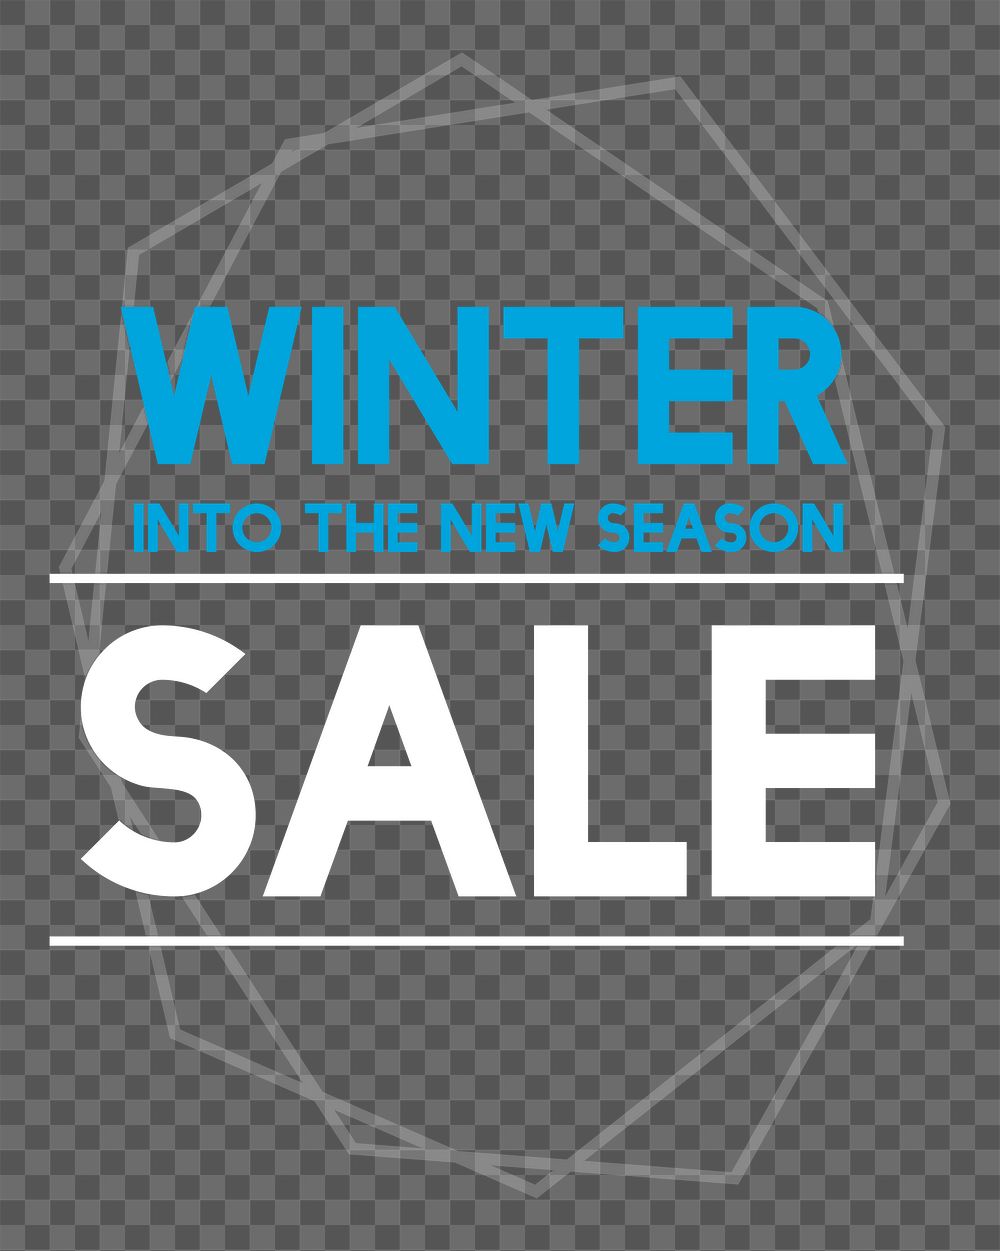 Png Into the new season winter sale element, transparent background